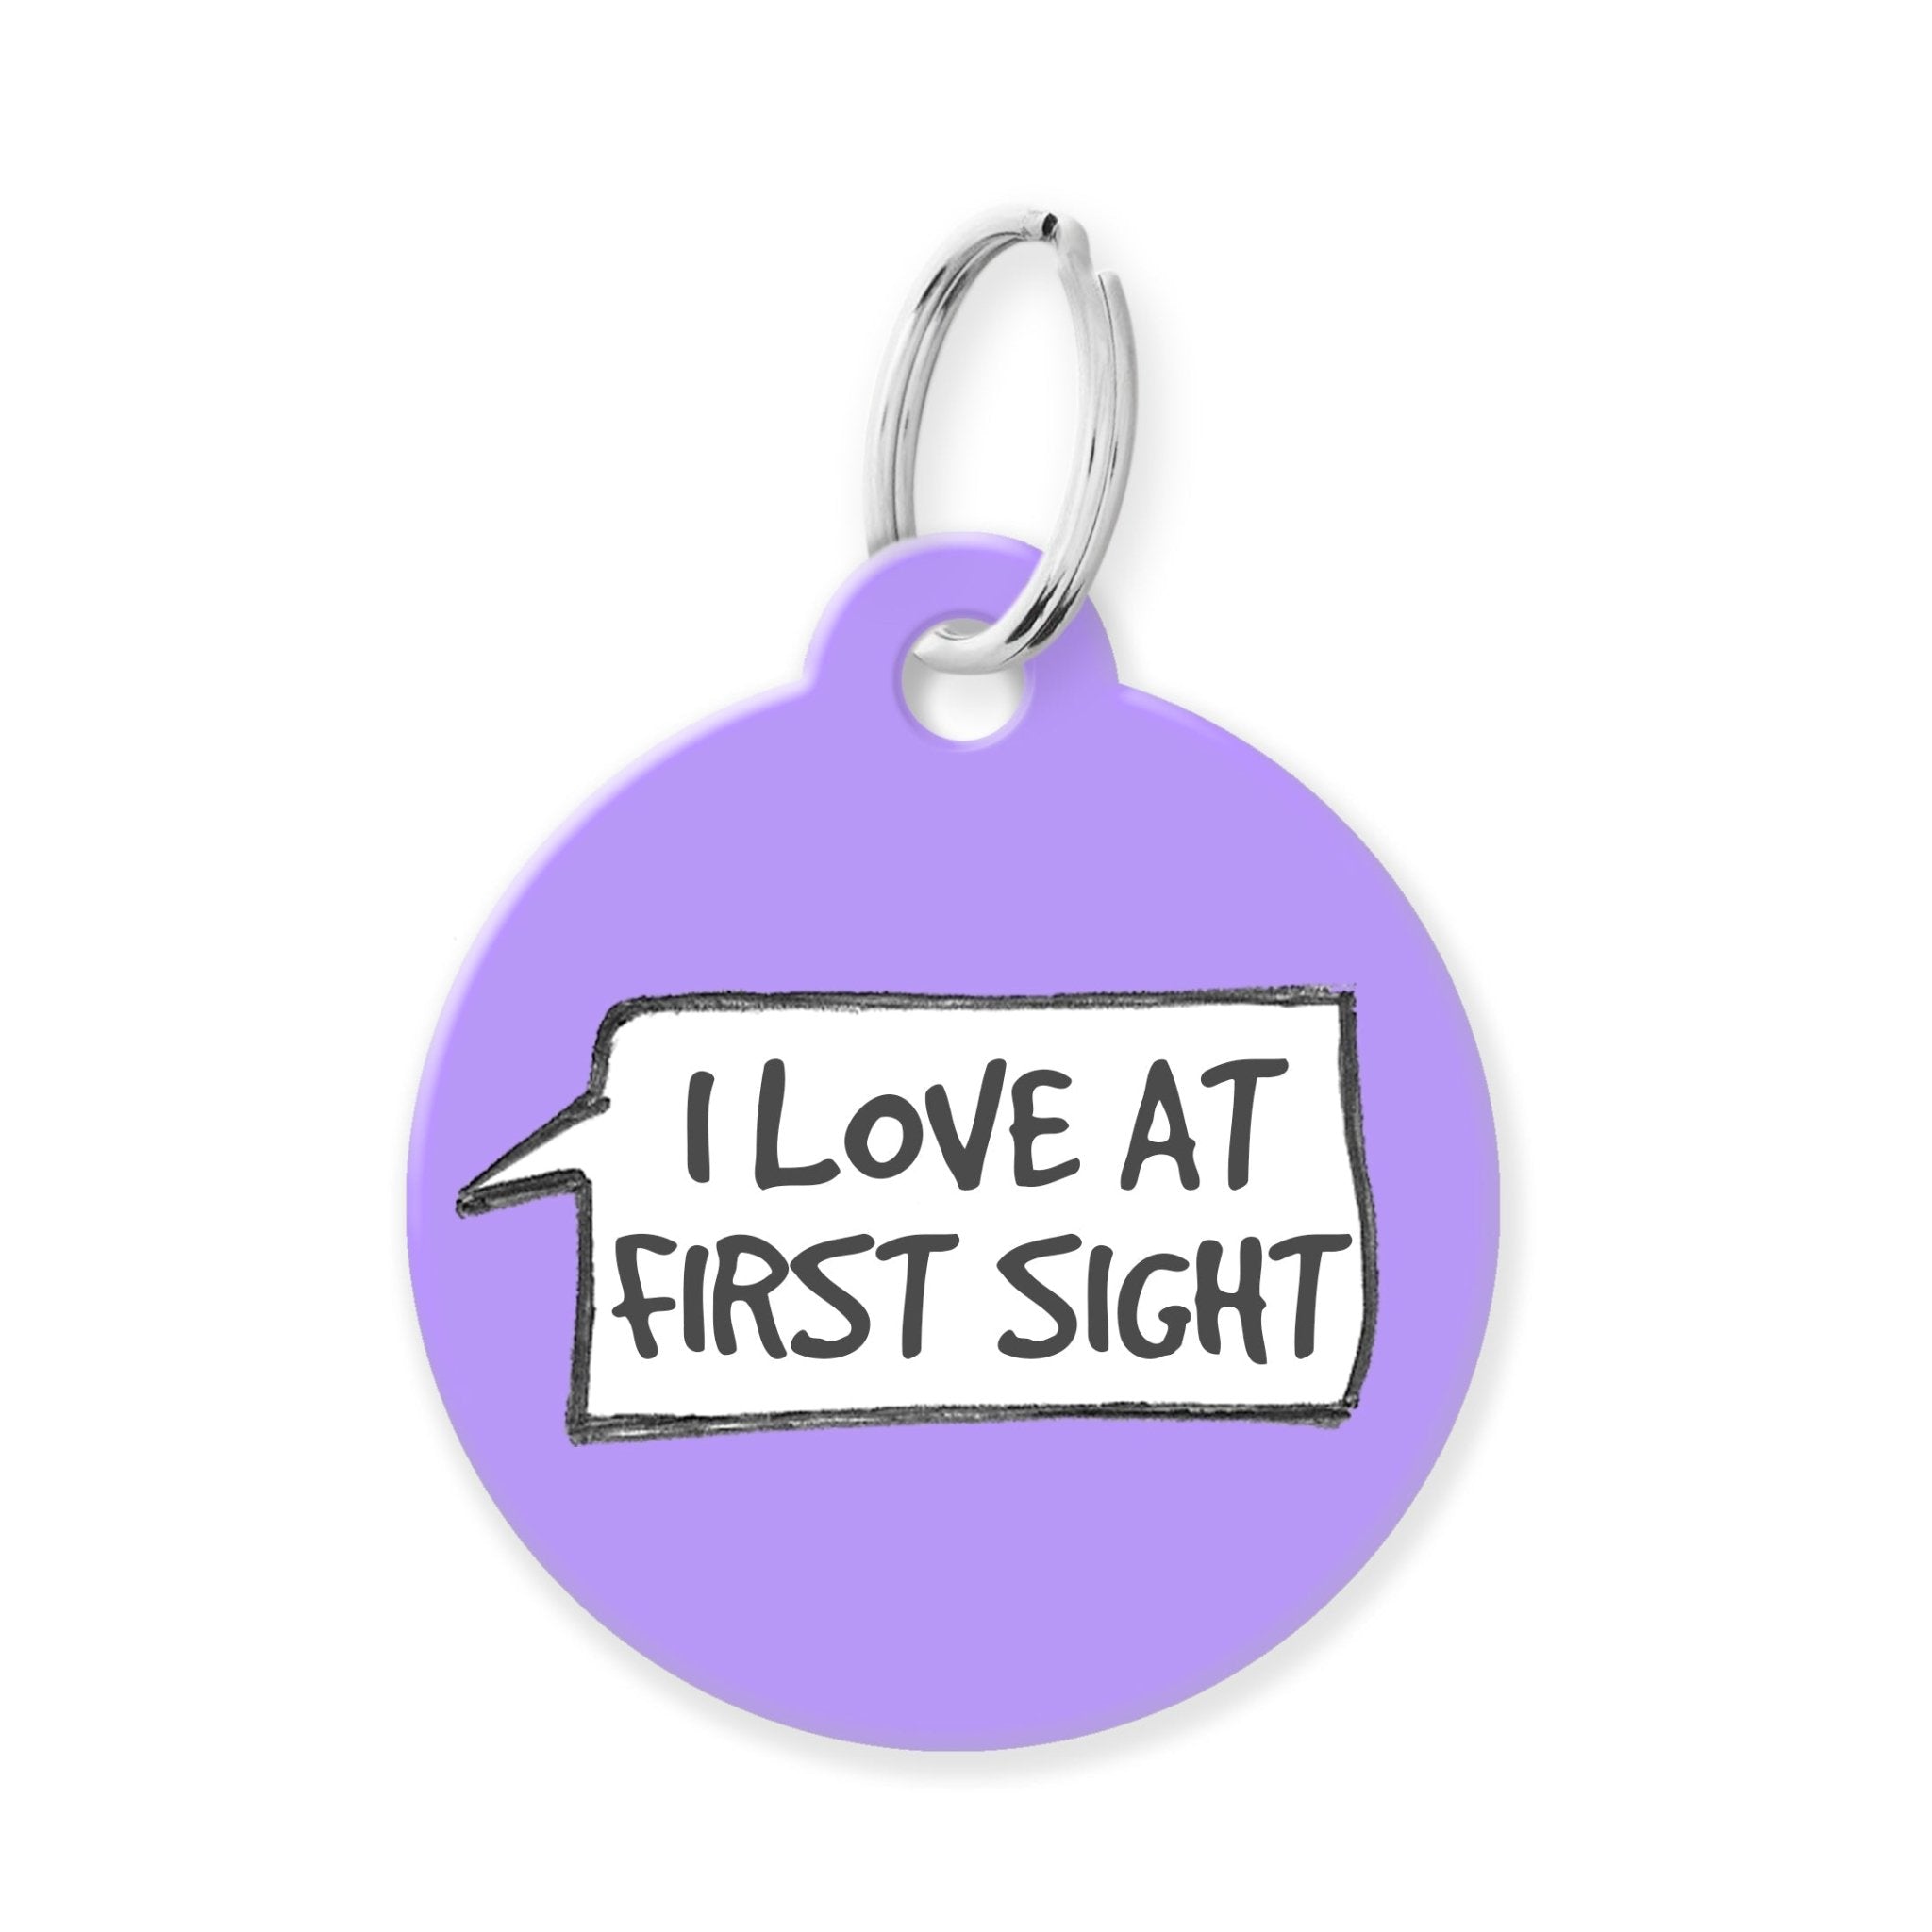 I Love at First Sight Pet Tag - The Barking Mutt